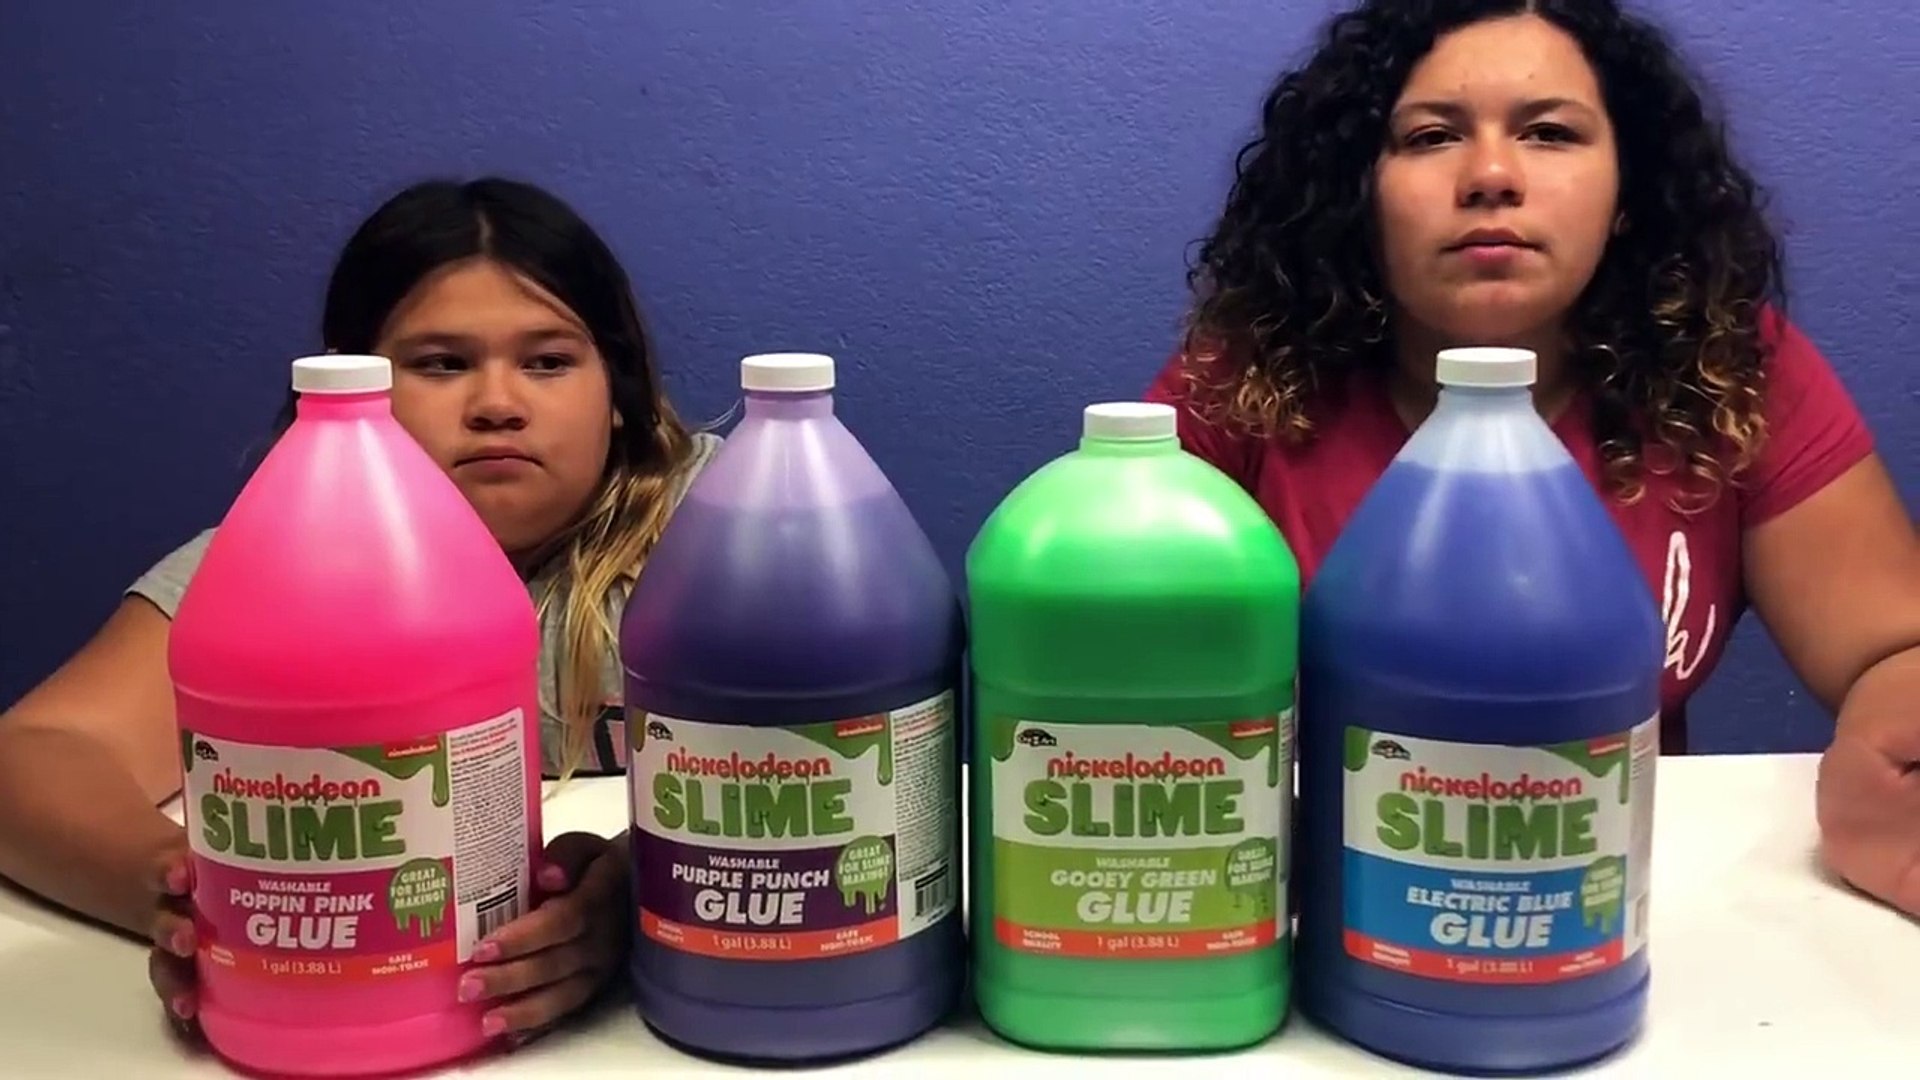 DIY Slime - NEW CRAZY ART NICKELODEON SLIME GLUE GALLONS – MAKING FOUR  GALLONS OF CRAZY ART NICKELODEON SLIMECredit: Life with BrothersFull video:  - Dailymotion Video